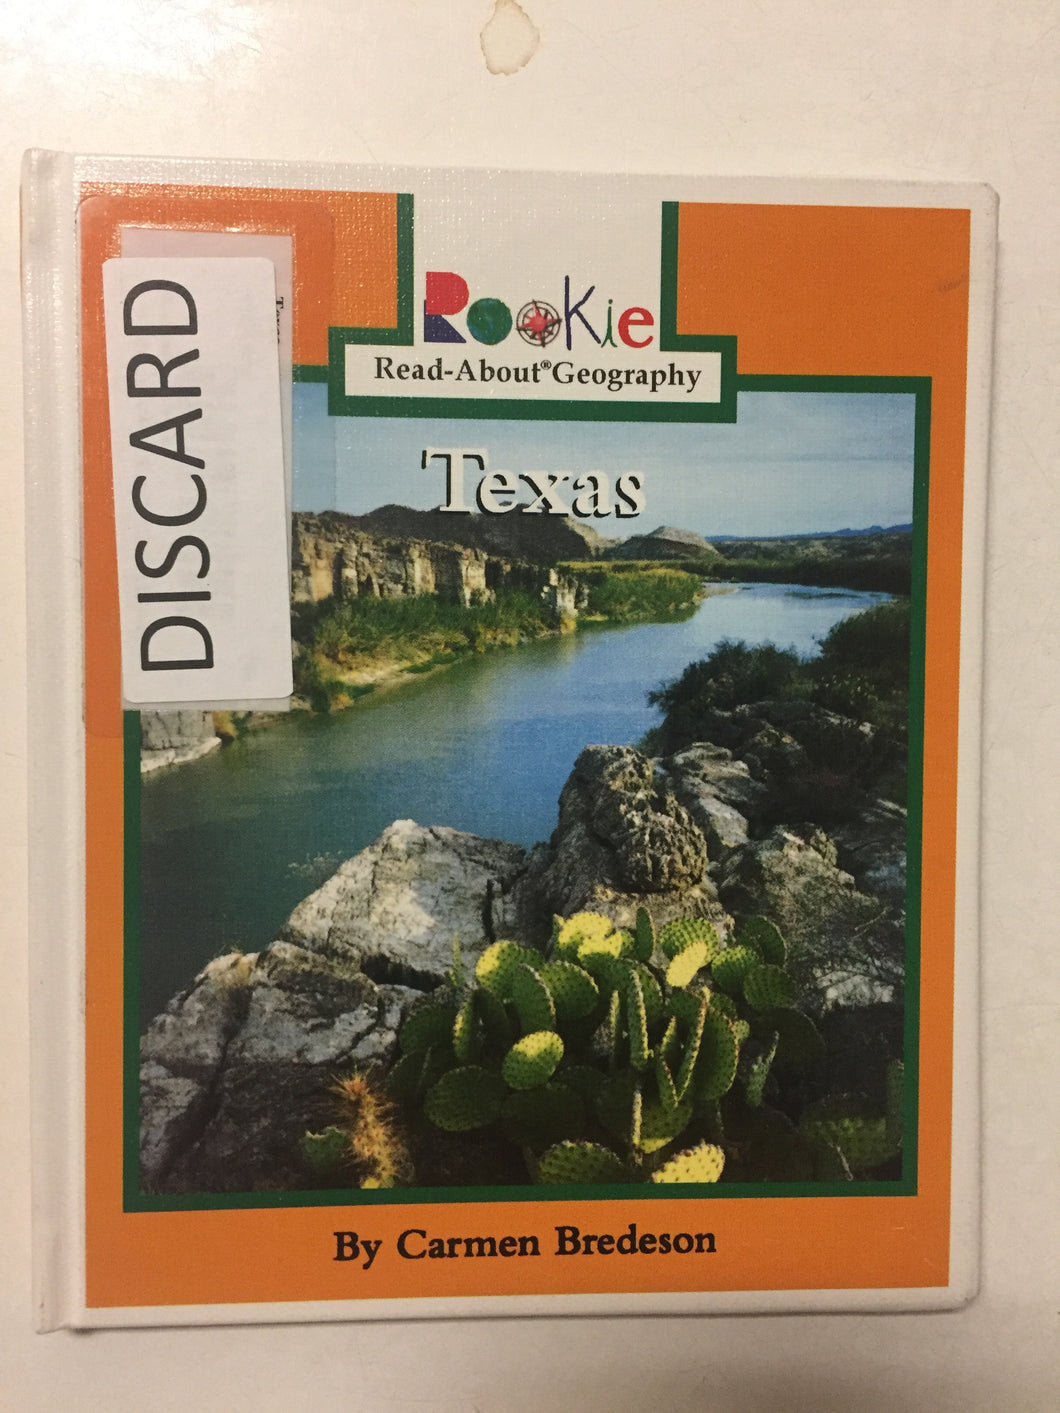 Texas (Rookie Read-About Geography) - Slick Cat Books 